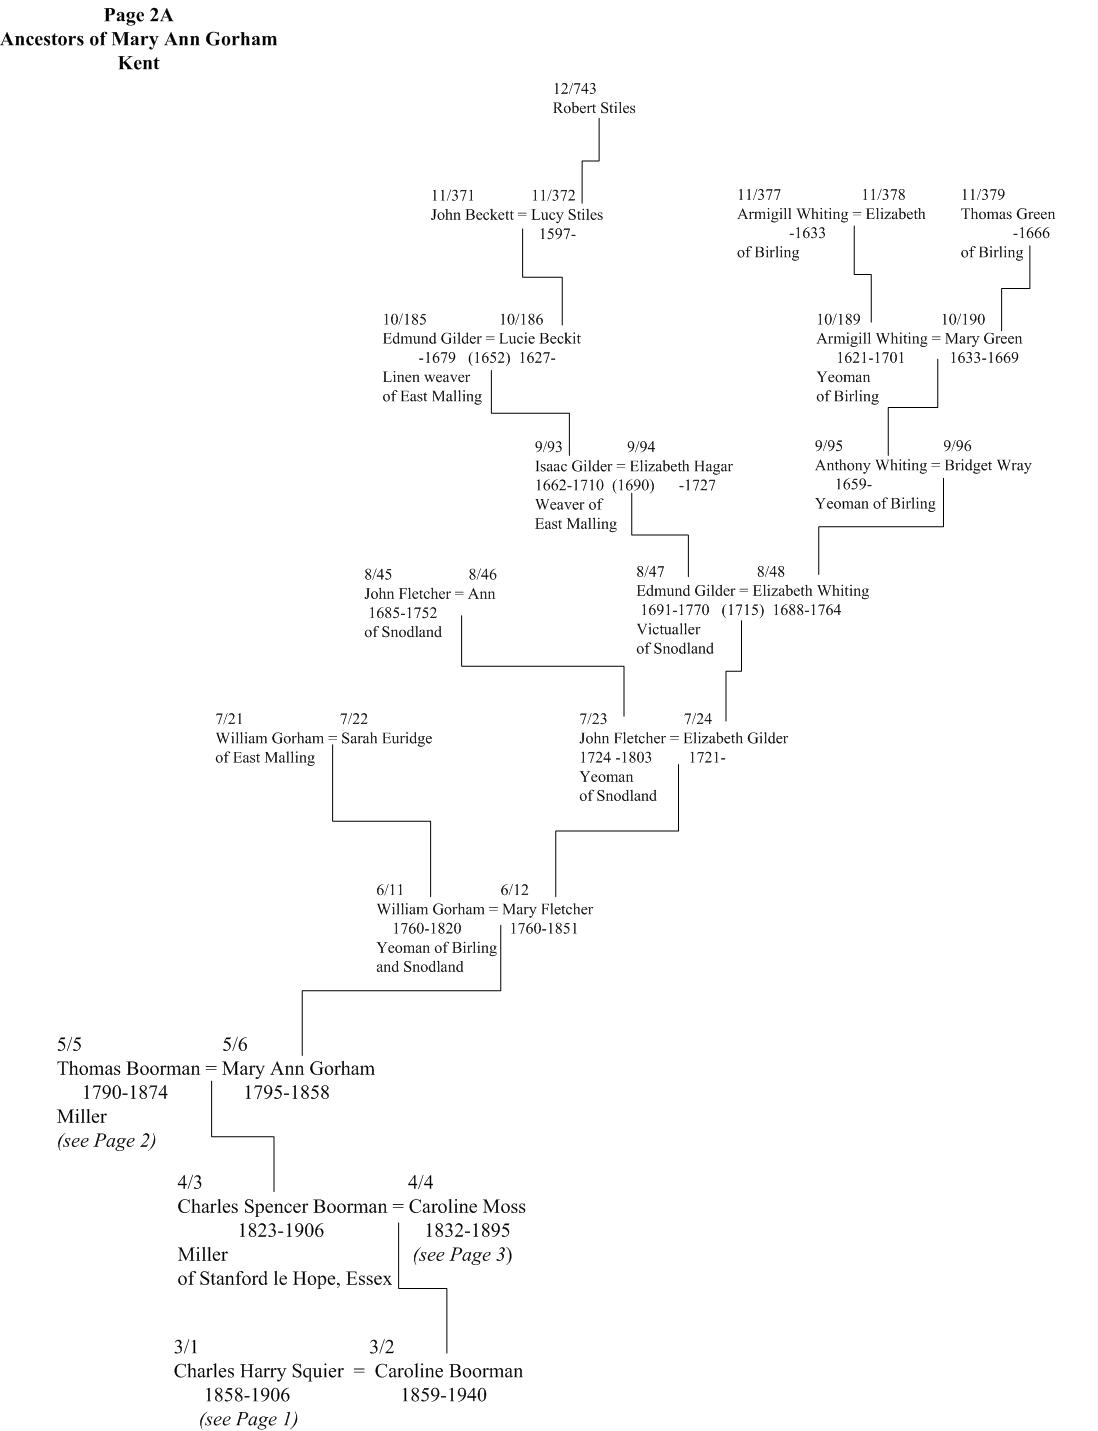 Squier family tree page 2A, Gorham of Kent ancestors